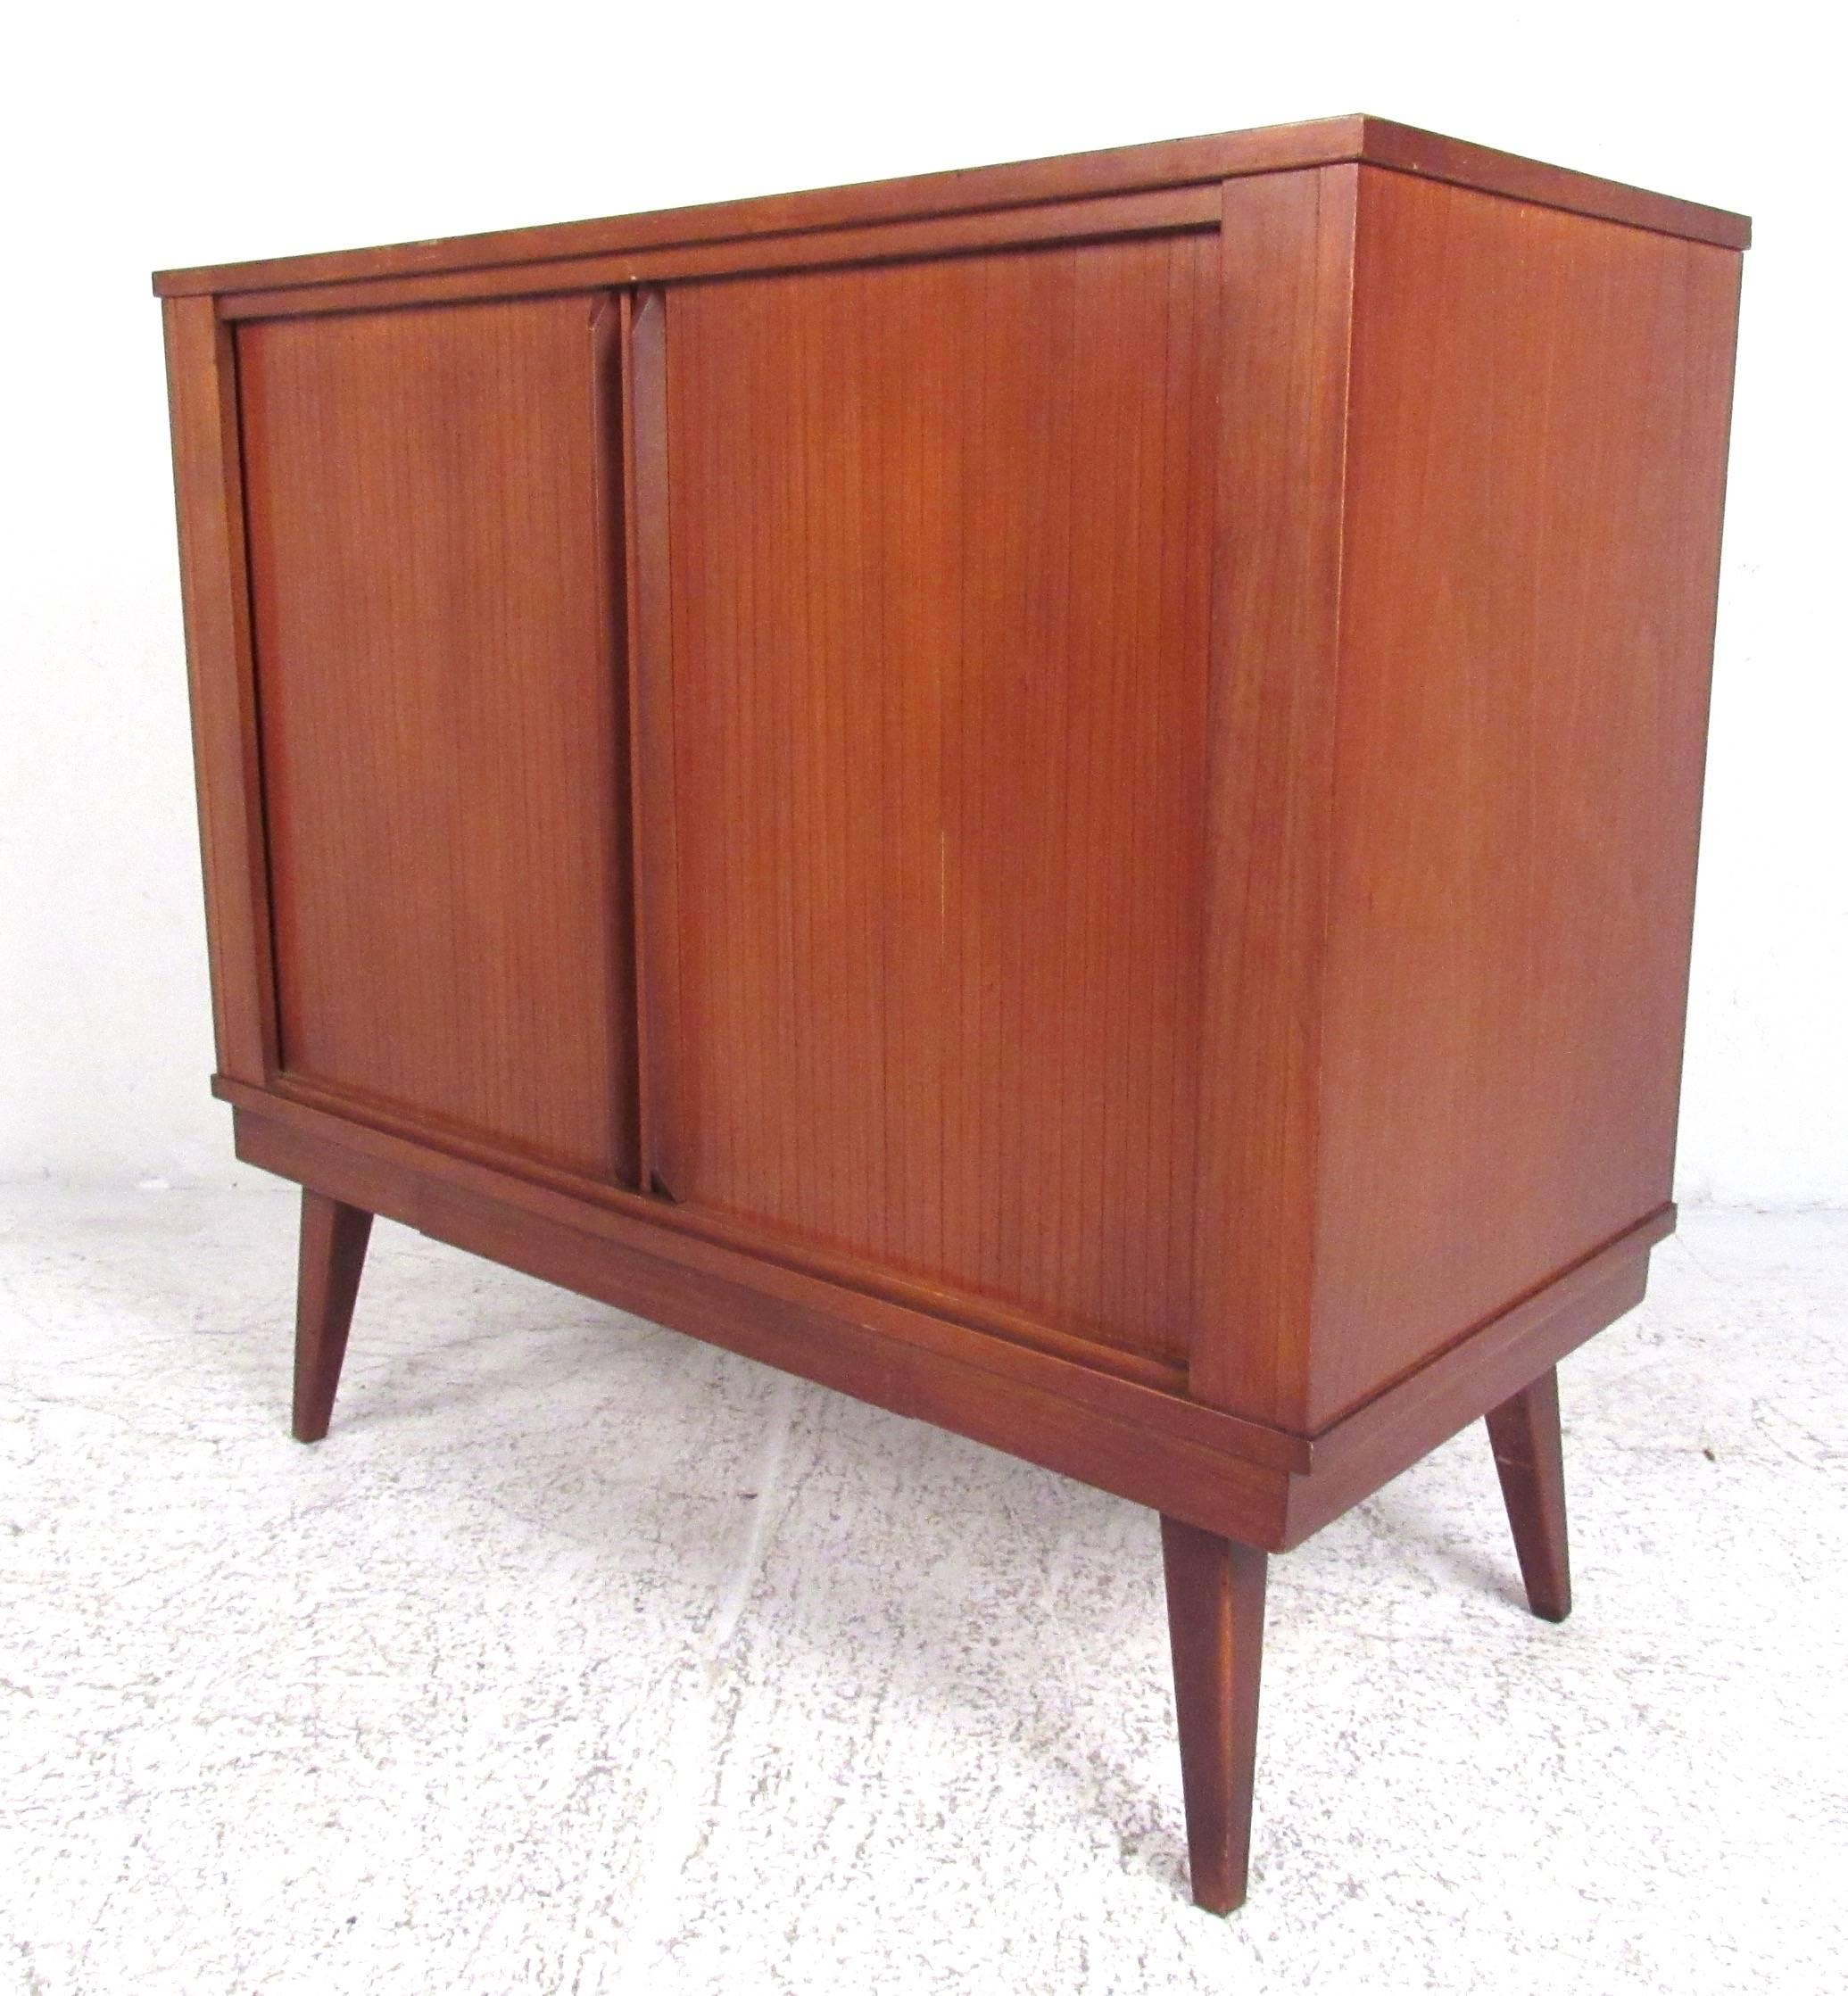 Nicely proportioned double tambour walnut cabinet with tapered legs. Ideal for entertainment centre/flat screen. Please confirm item location (NY or NJ) with dealer.